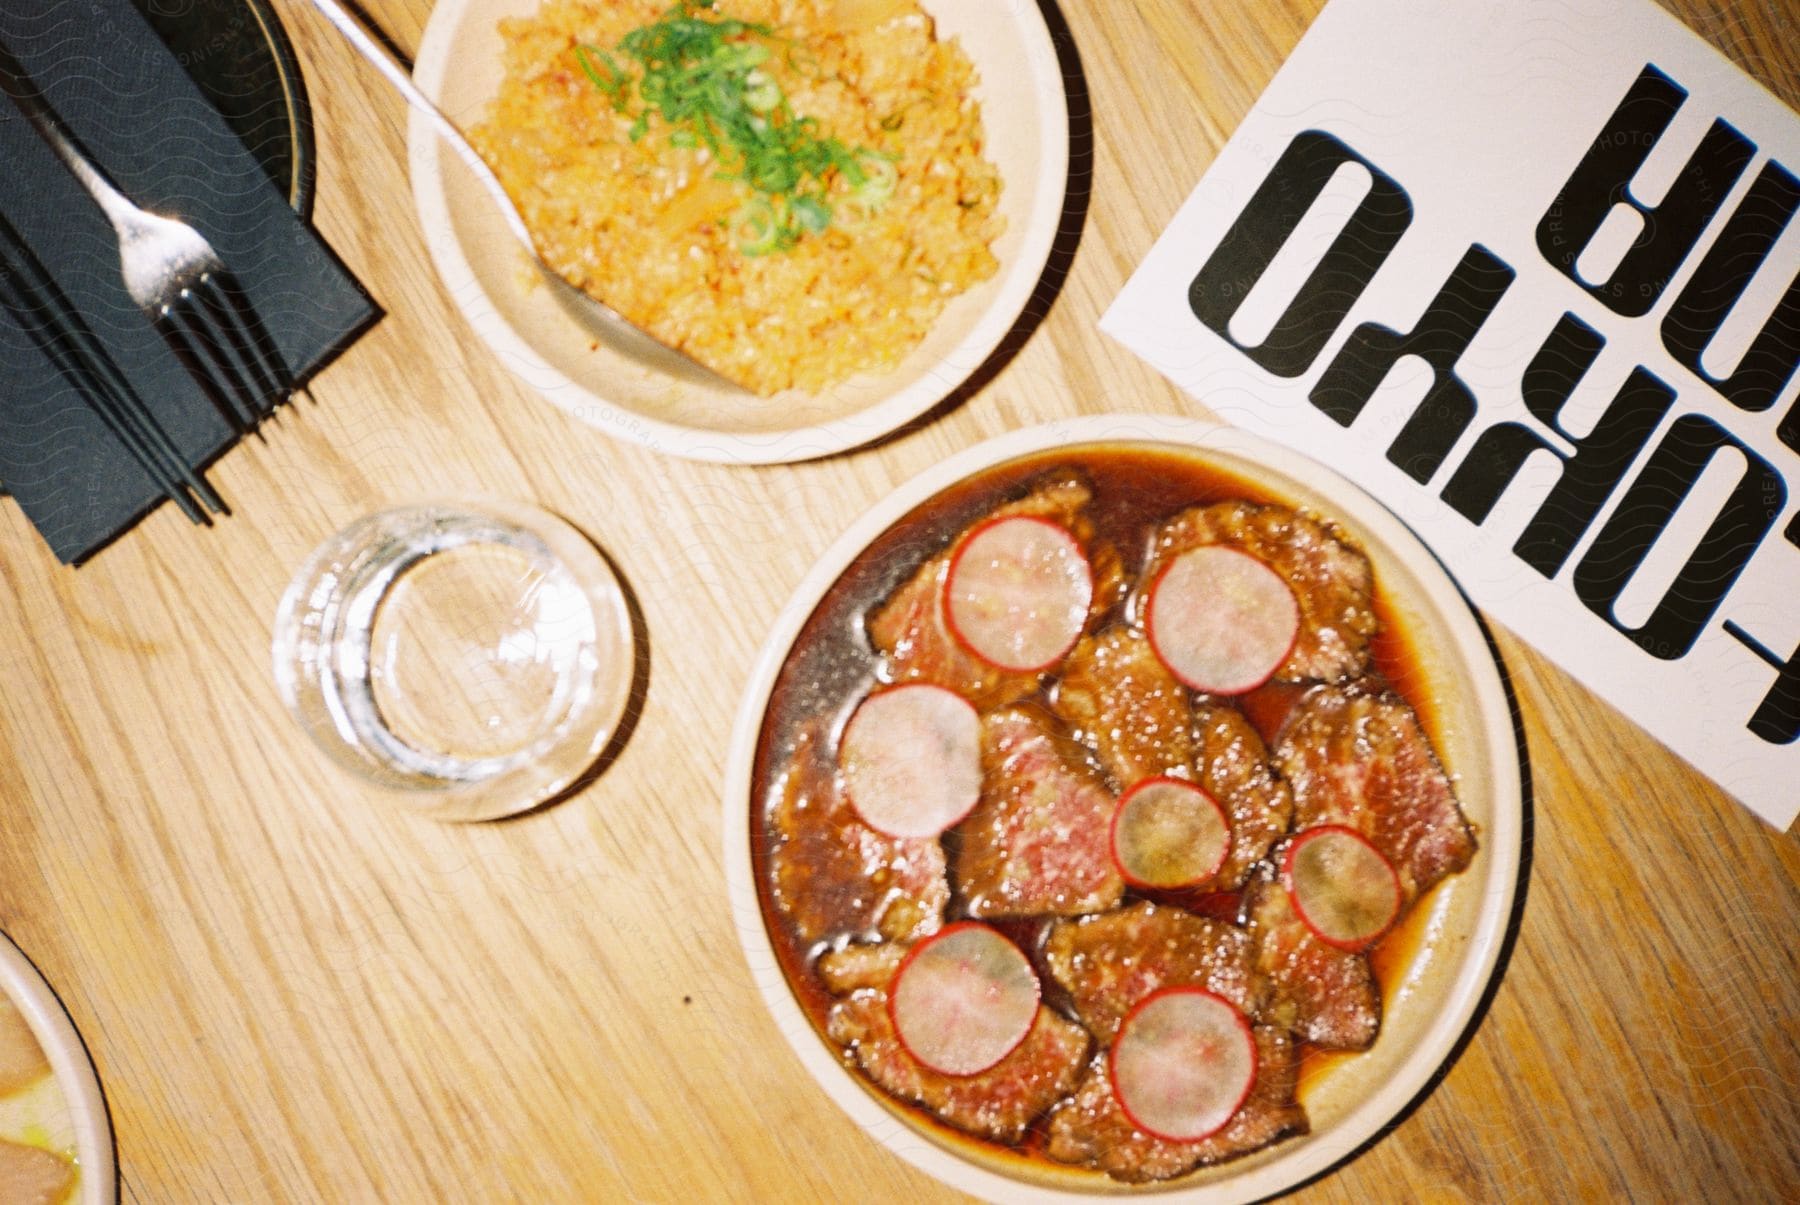 Top-down view of a dining table with a bowl of fried rice garnished with green onions, a bowl of beef with radish slices, an empty glass, black chopsticks, and a magazine with bold black and white lettering.